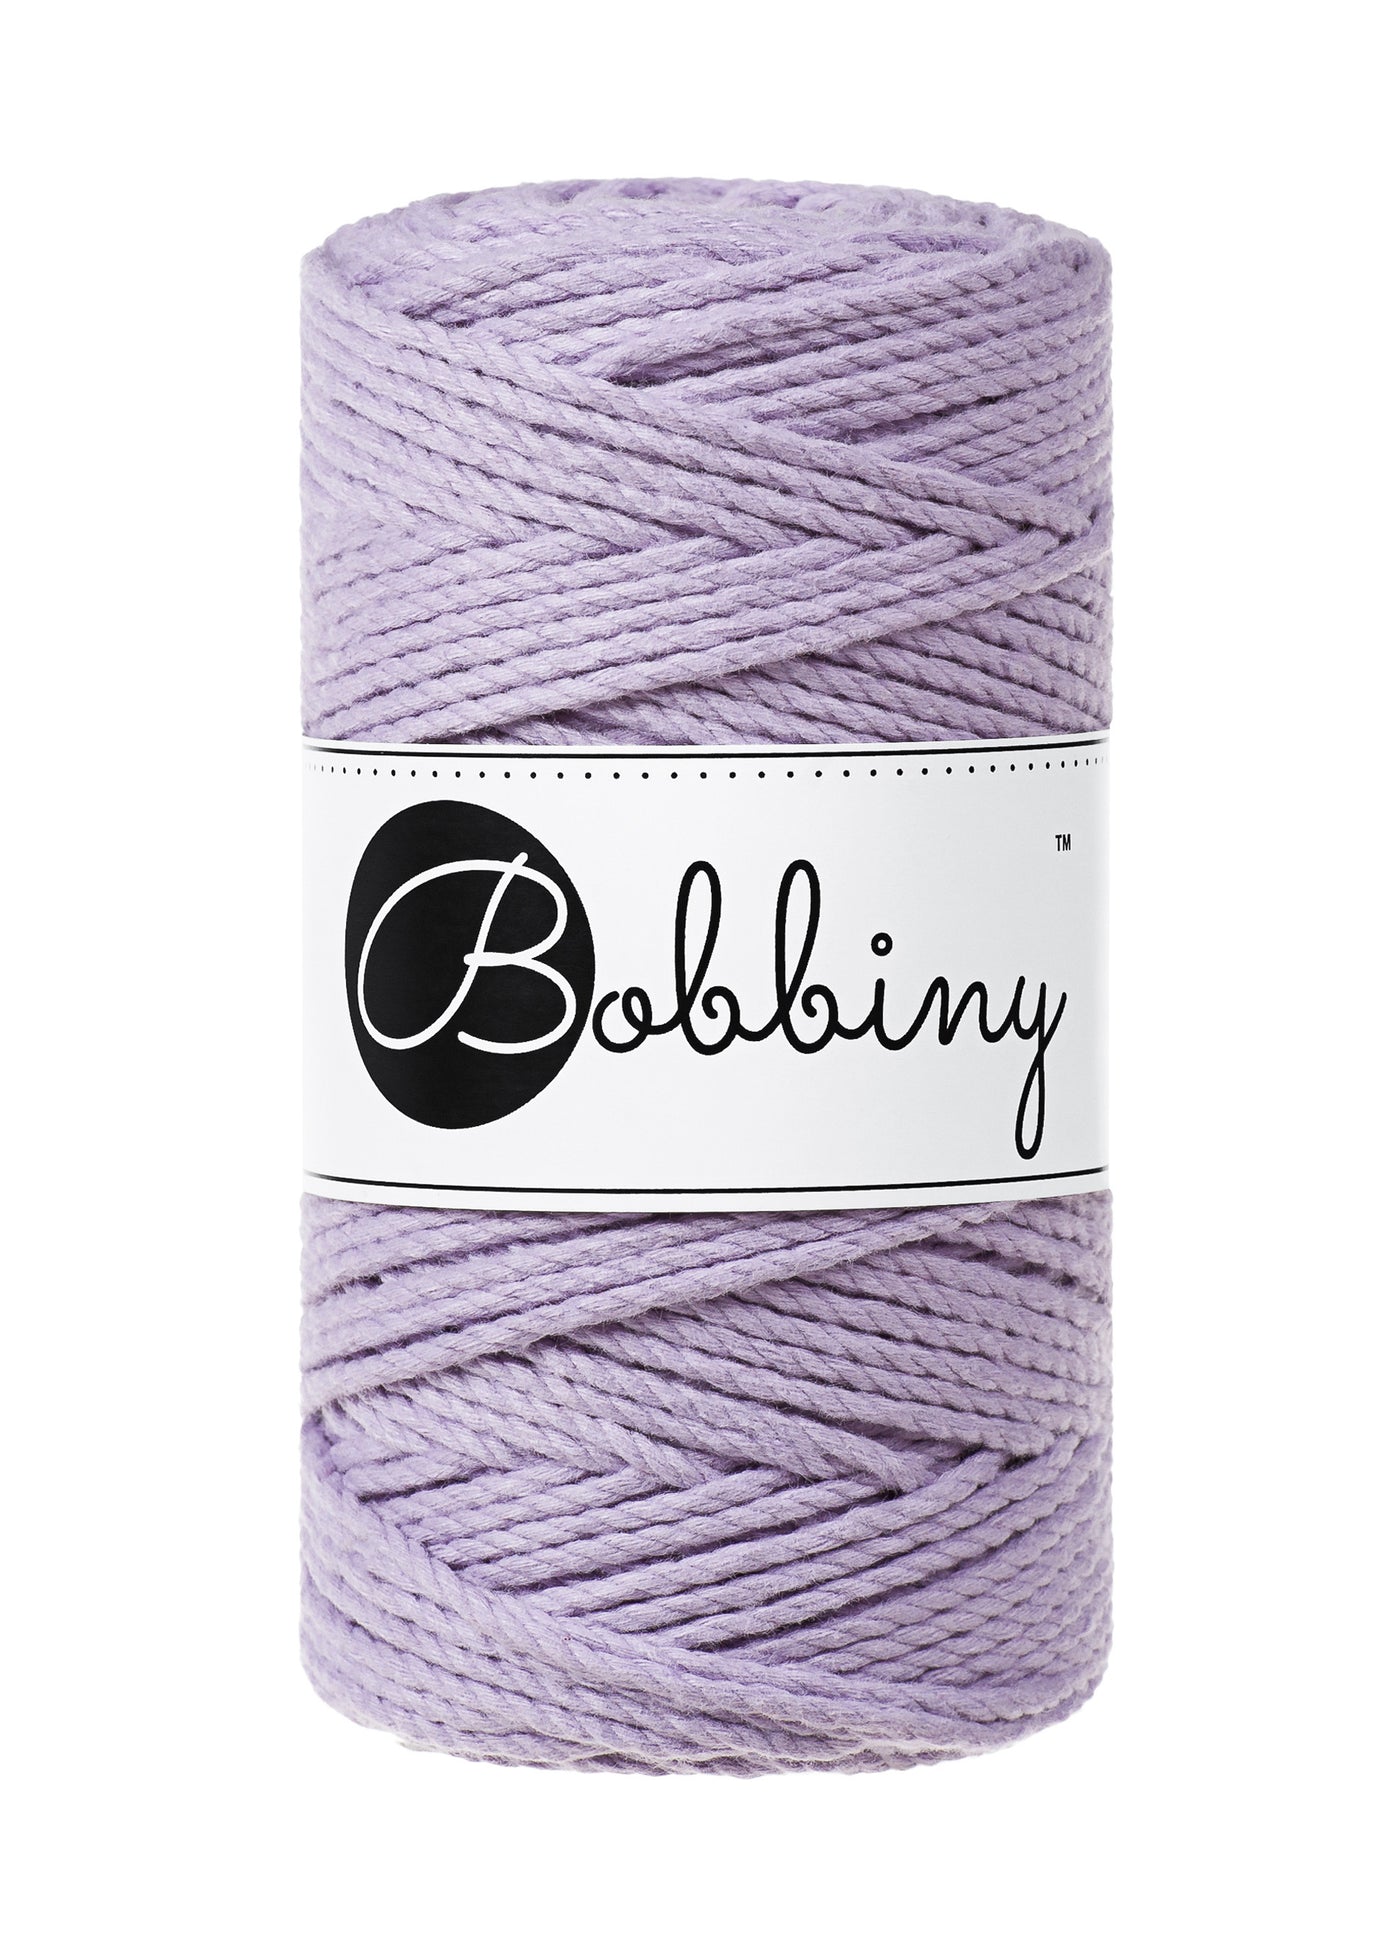 Lavender shade macrame rope 3ply 3mm 